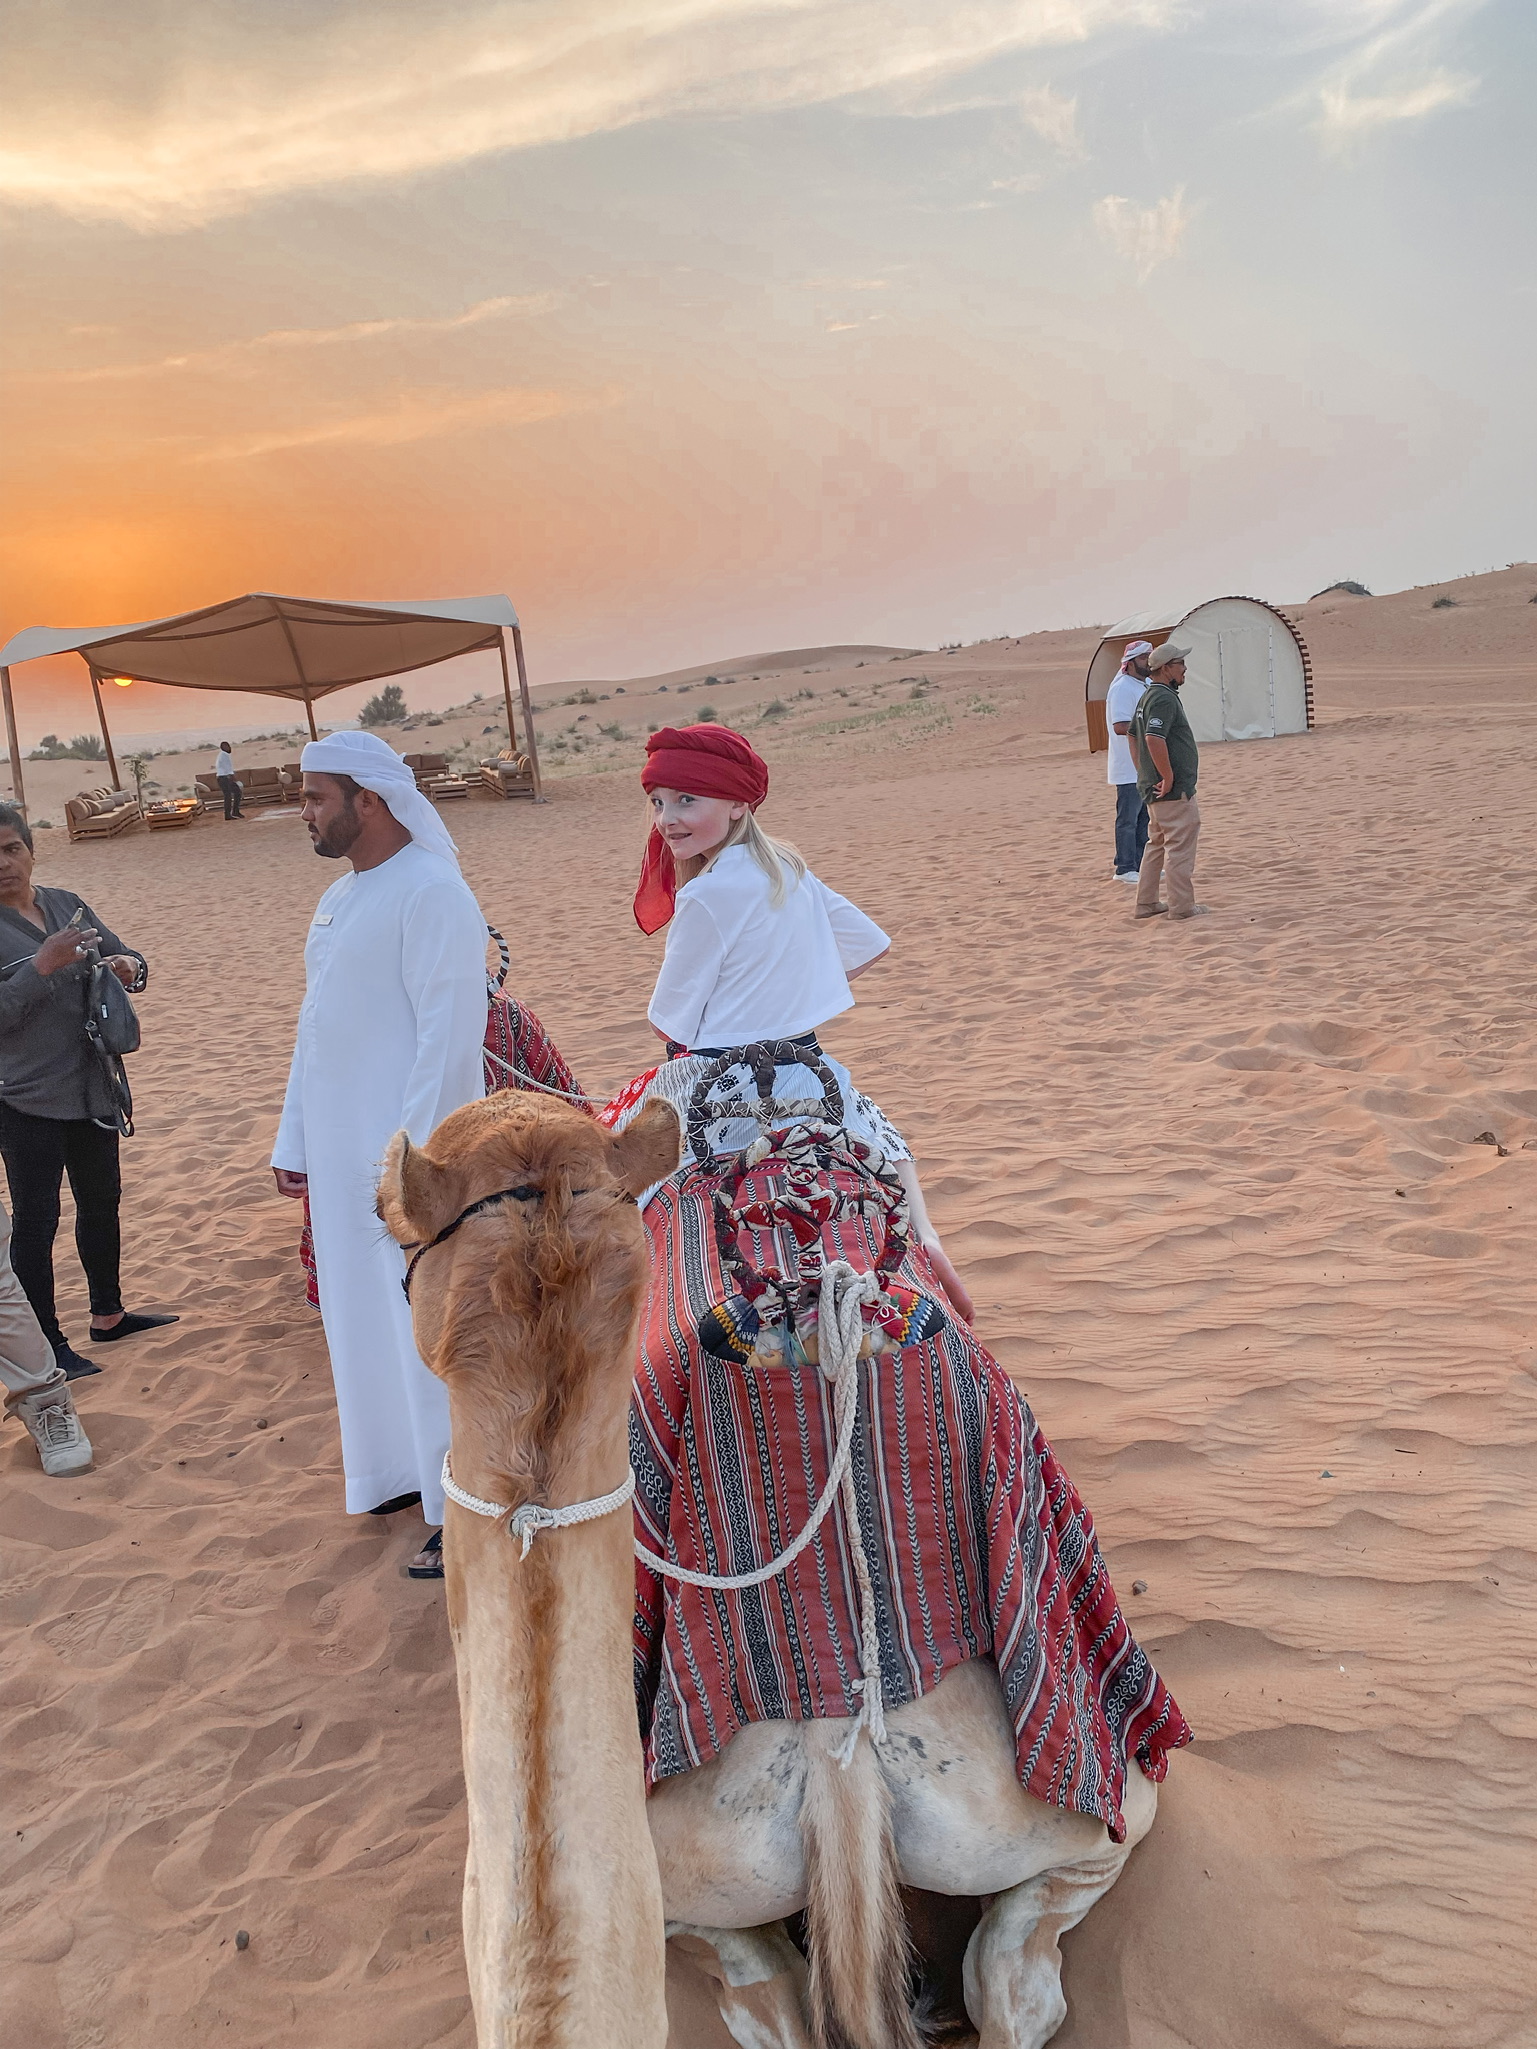 planning a trip to the middle east, where to go in the middle east, how to plan a trip to the middle east, dubai, united arab emirates, UAE, erin busbee, busbee style, busbee family travels, desert safari, platinum heritage desert safari, riding camels in desert, the empty quarter